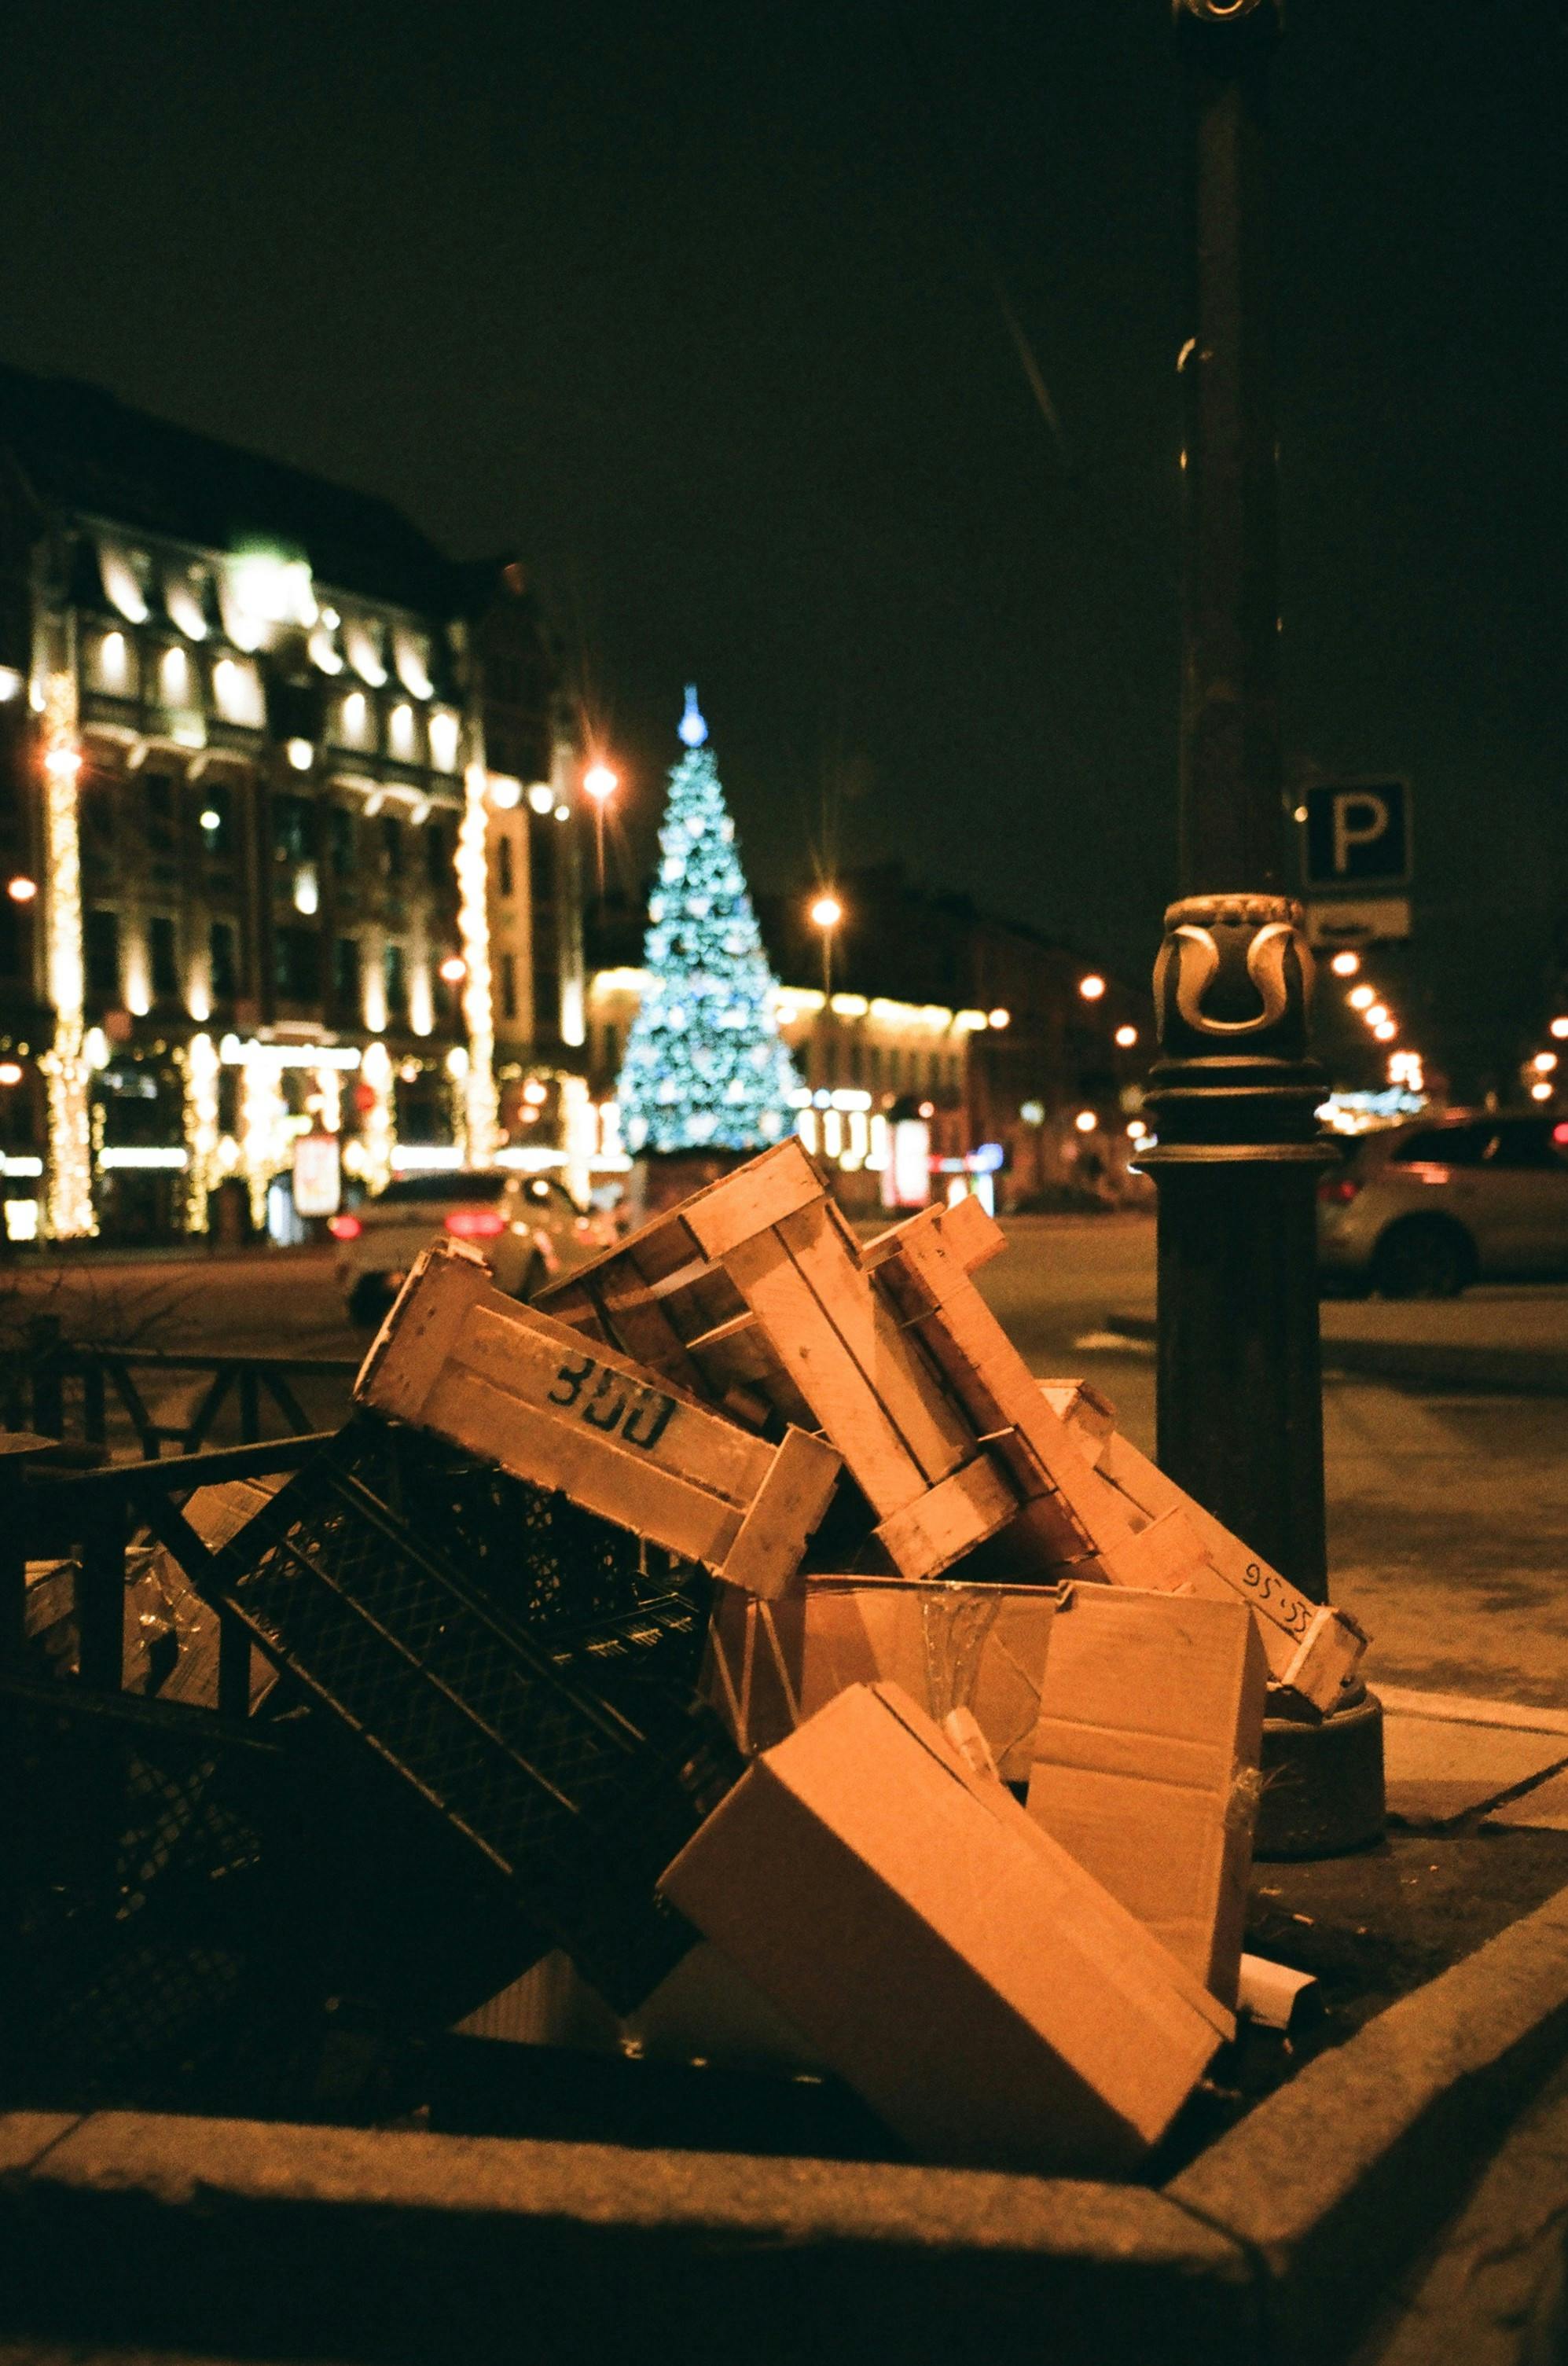 Boxes and belongings on the street | Source: Pexels